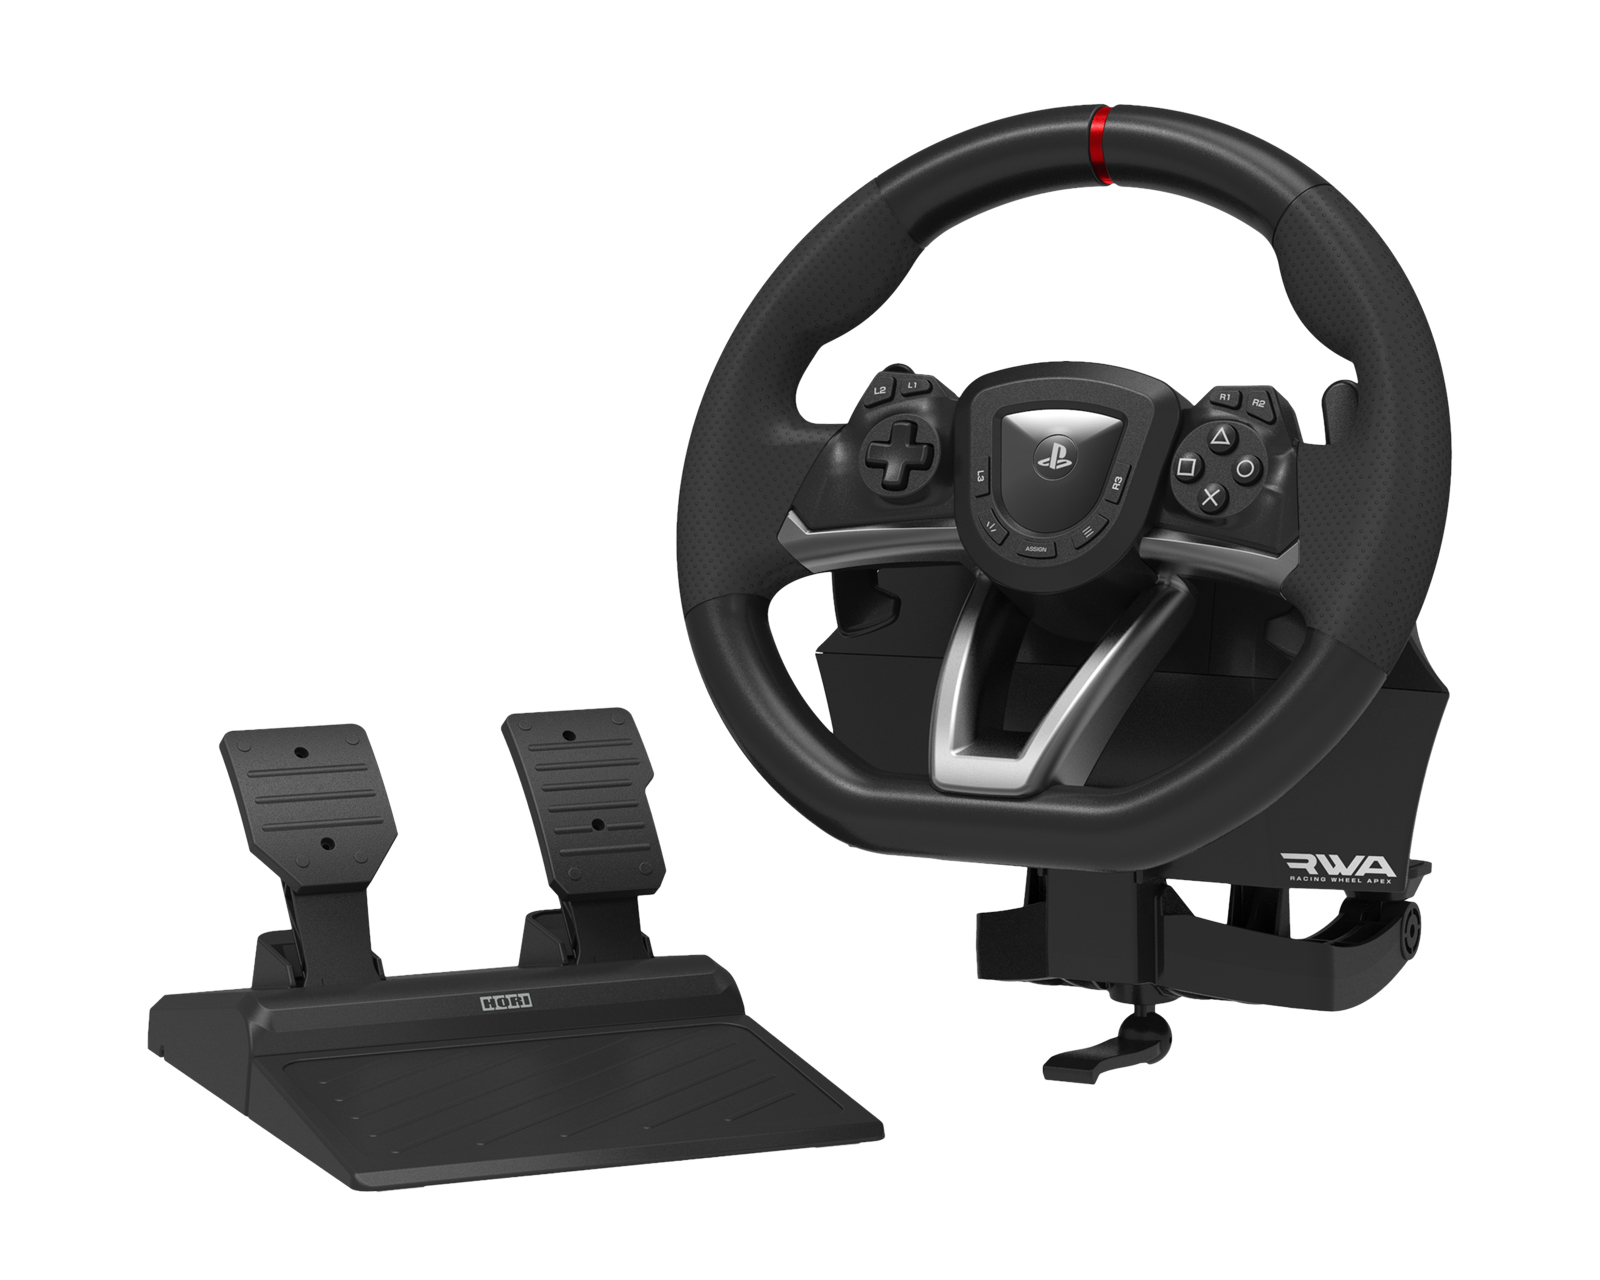 Hori Racing Wheel for PlayStation 5 (PS5/PS4/PC)